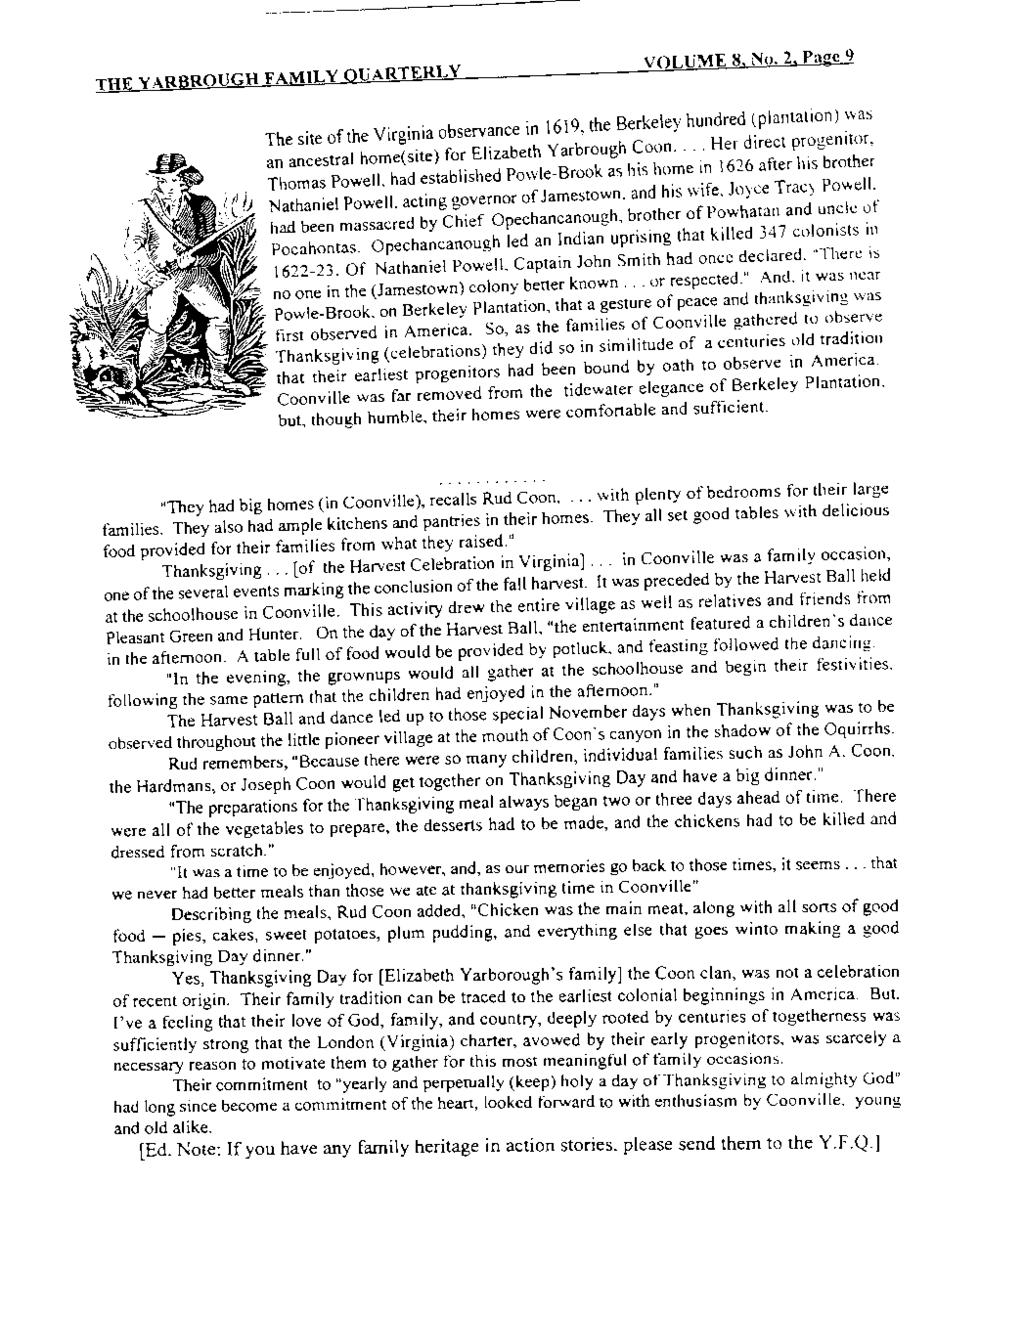 THE YARBROUGH FAMILY QUARTERLY VOLUME 8, No.2, Page 9 The site of the Virginia observance in 1619, the Berkeley hundred ~plantation) :vas an ancestral home(site) for Elizabeth Yarbrough Coon.